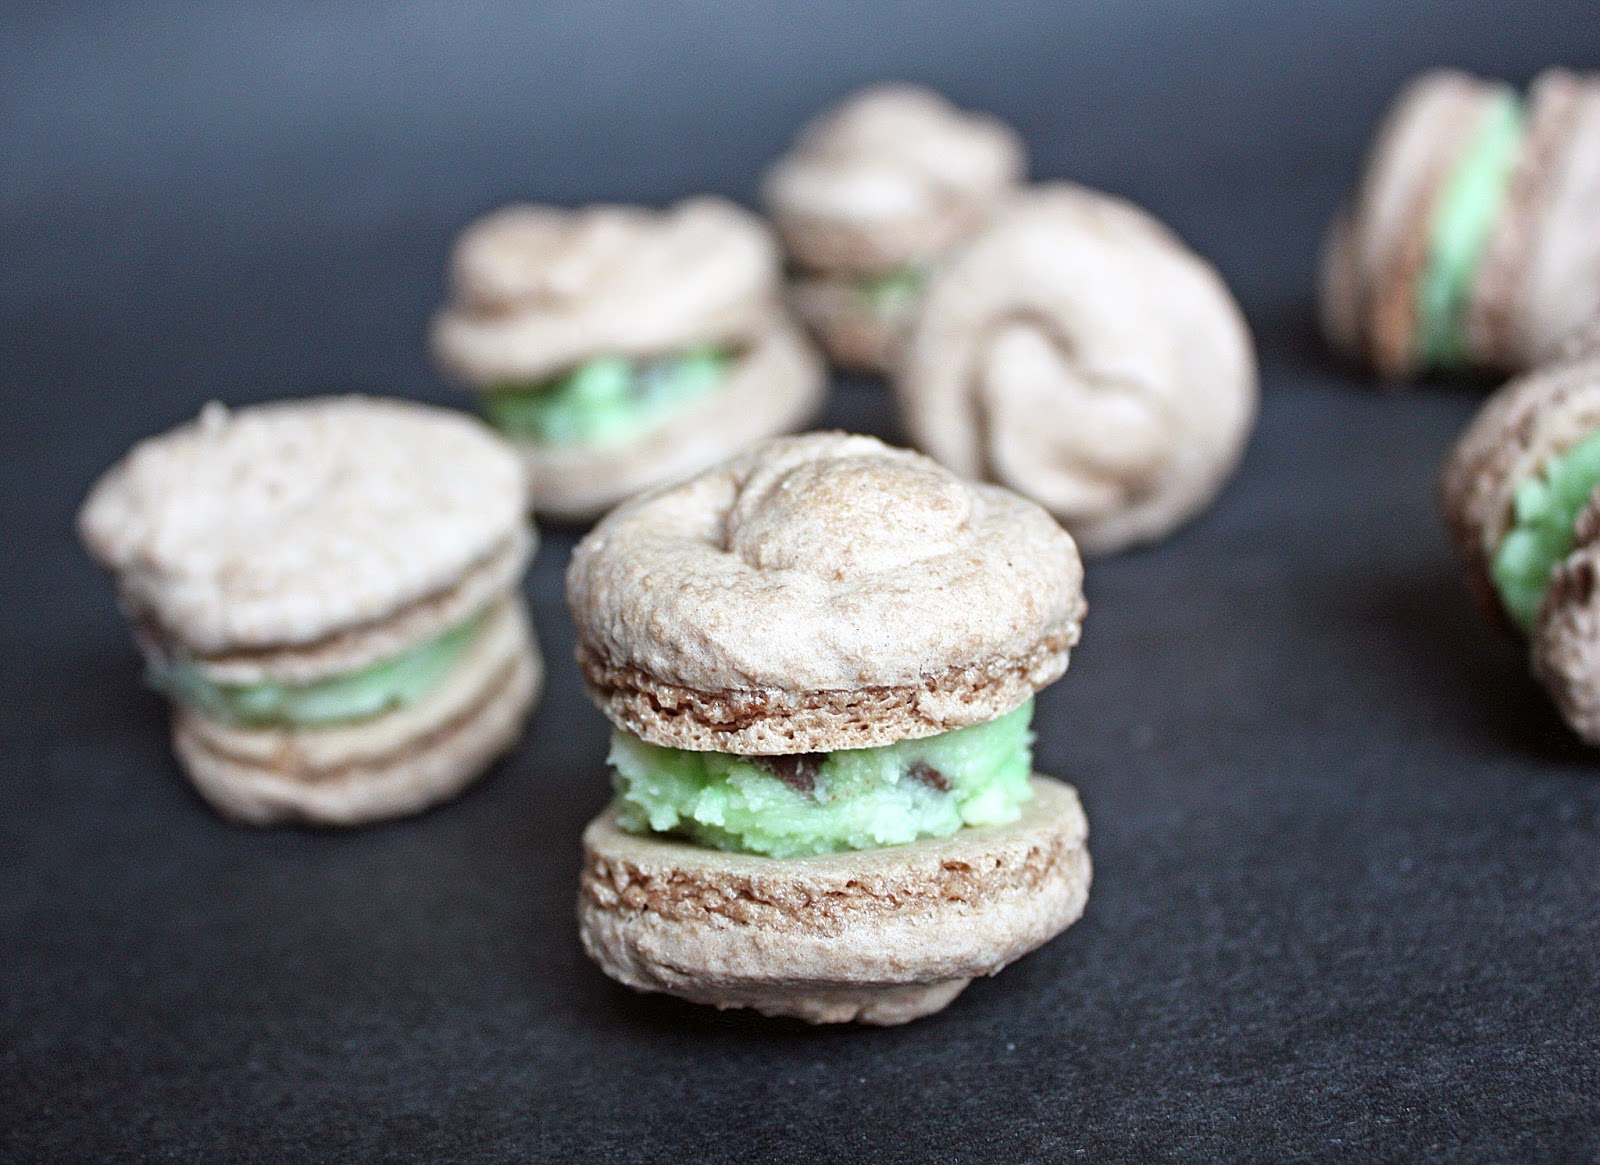 gluten-free vegan chocolate macarons with mint chocolate chip frosting